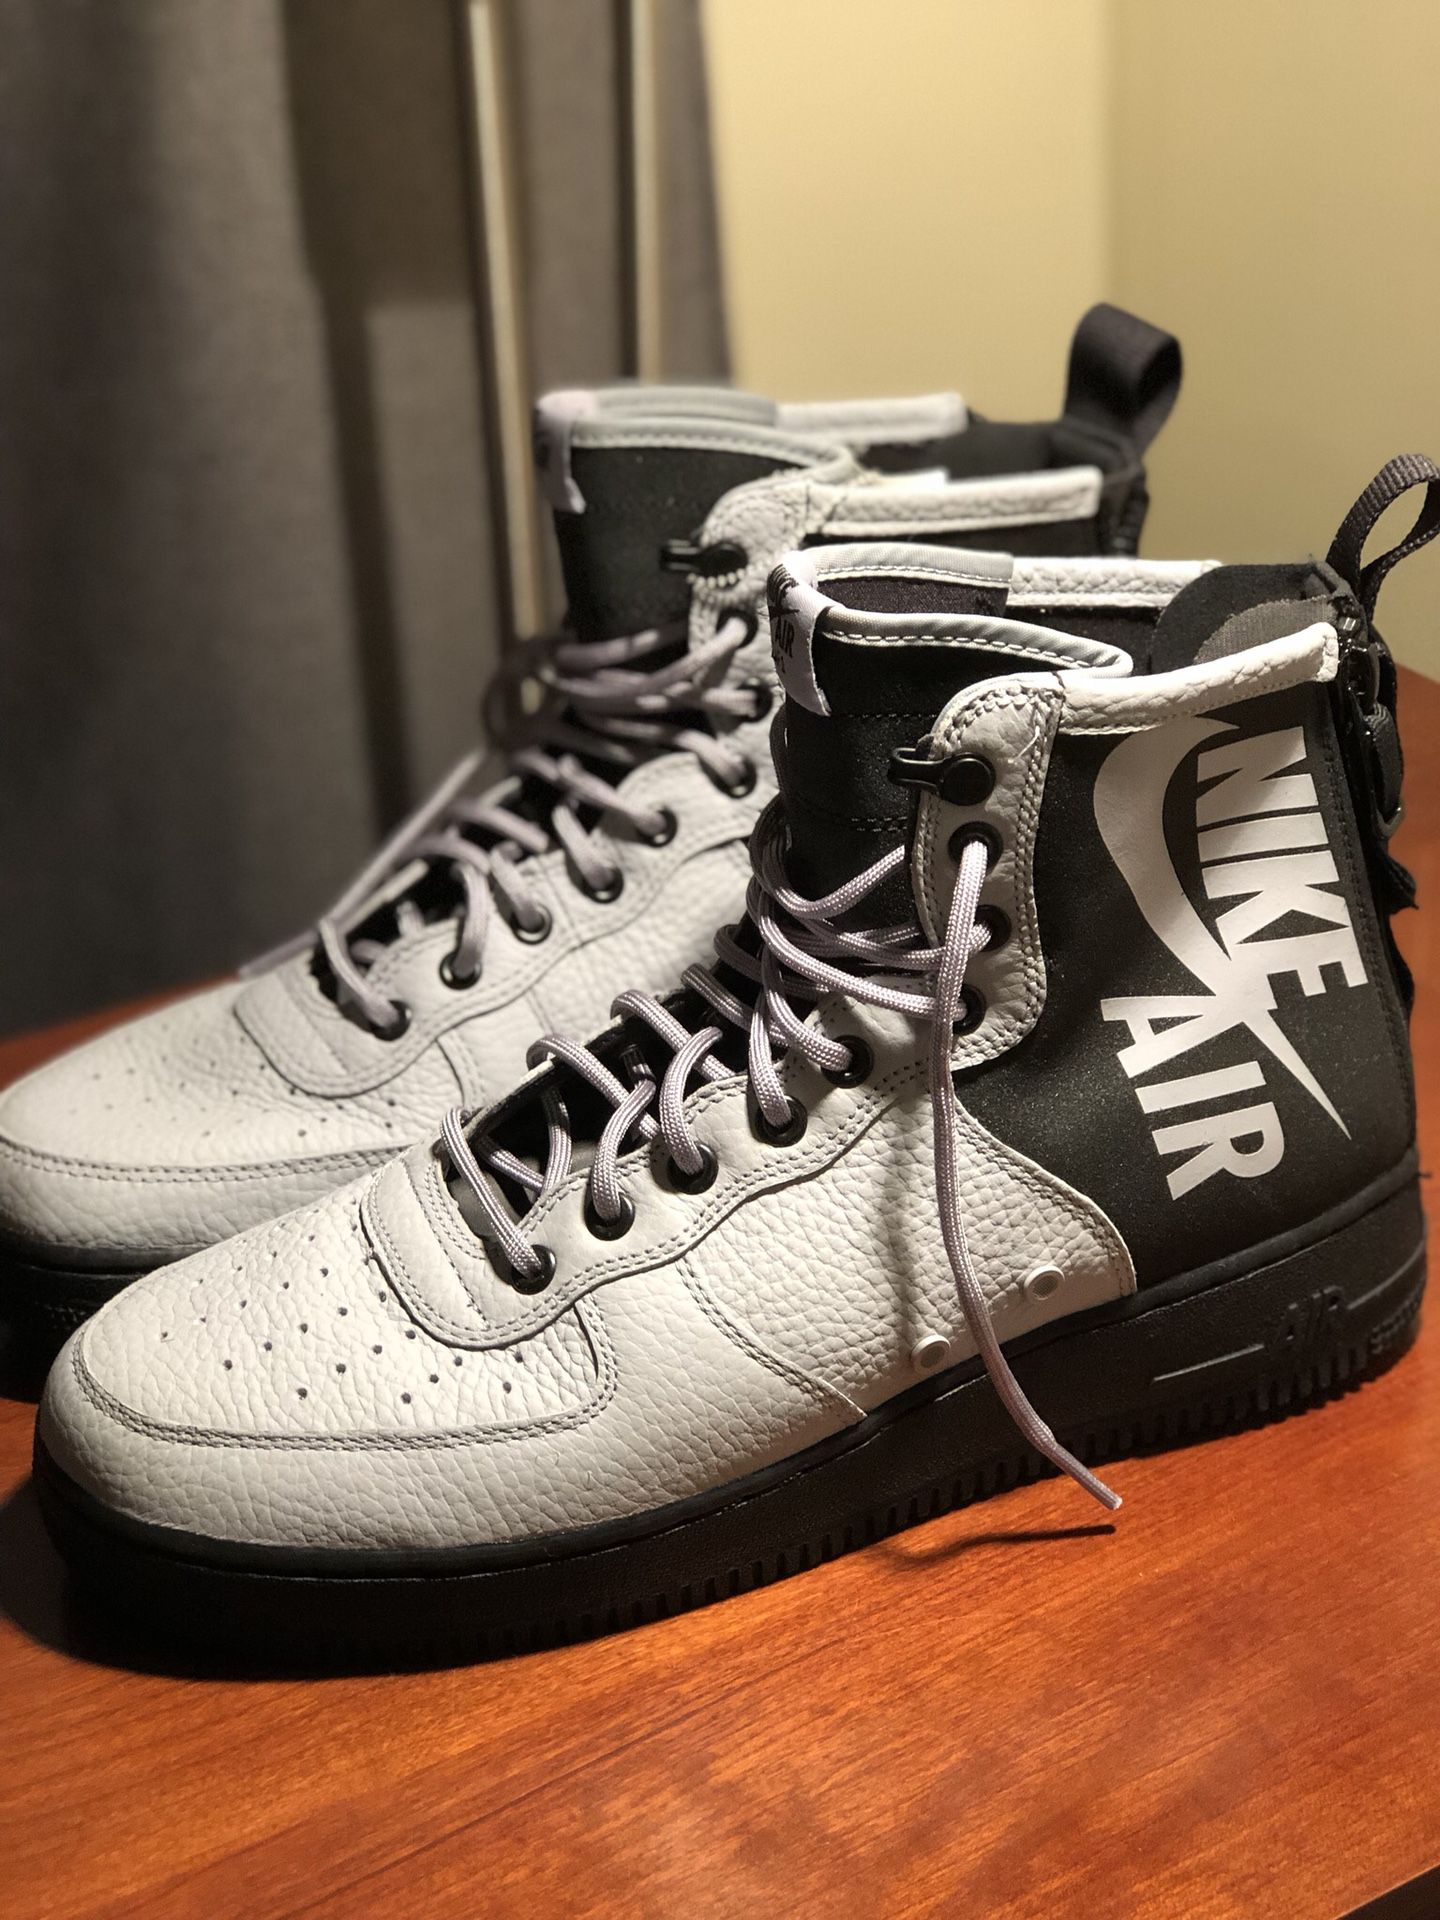 New Nike SF Air Force 1 Mid ‘Wolf Grey’- size 11